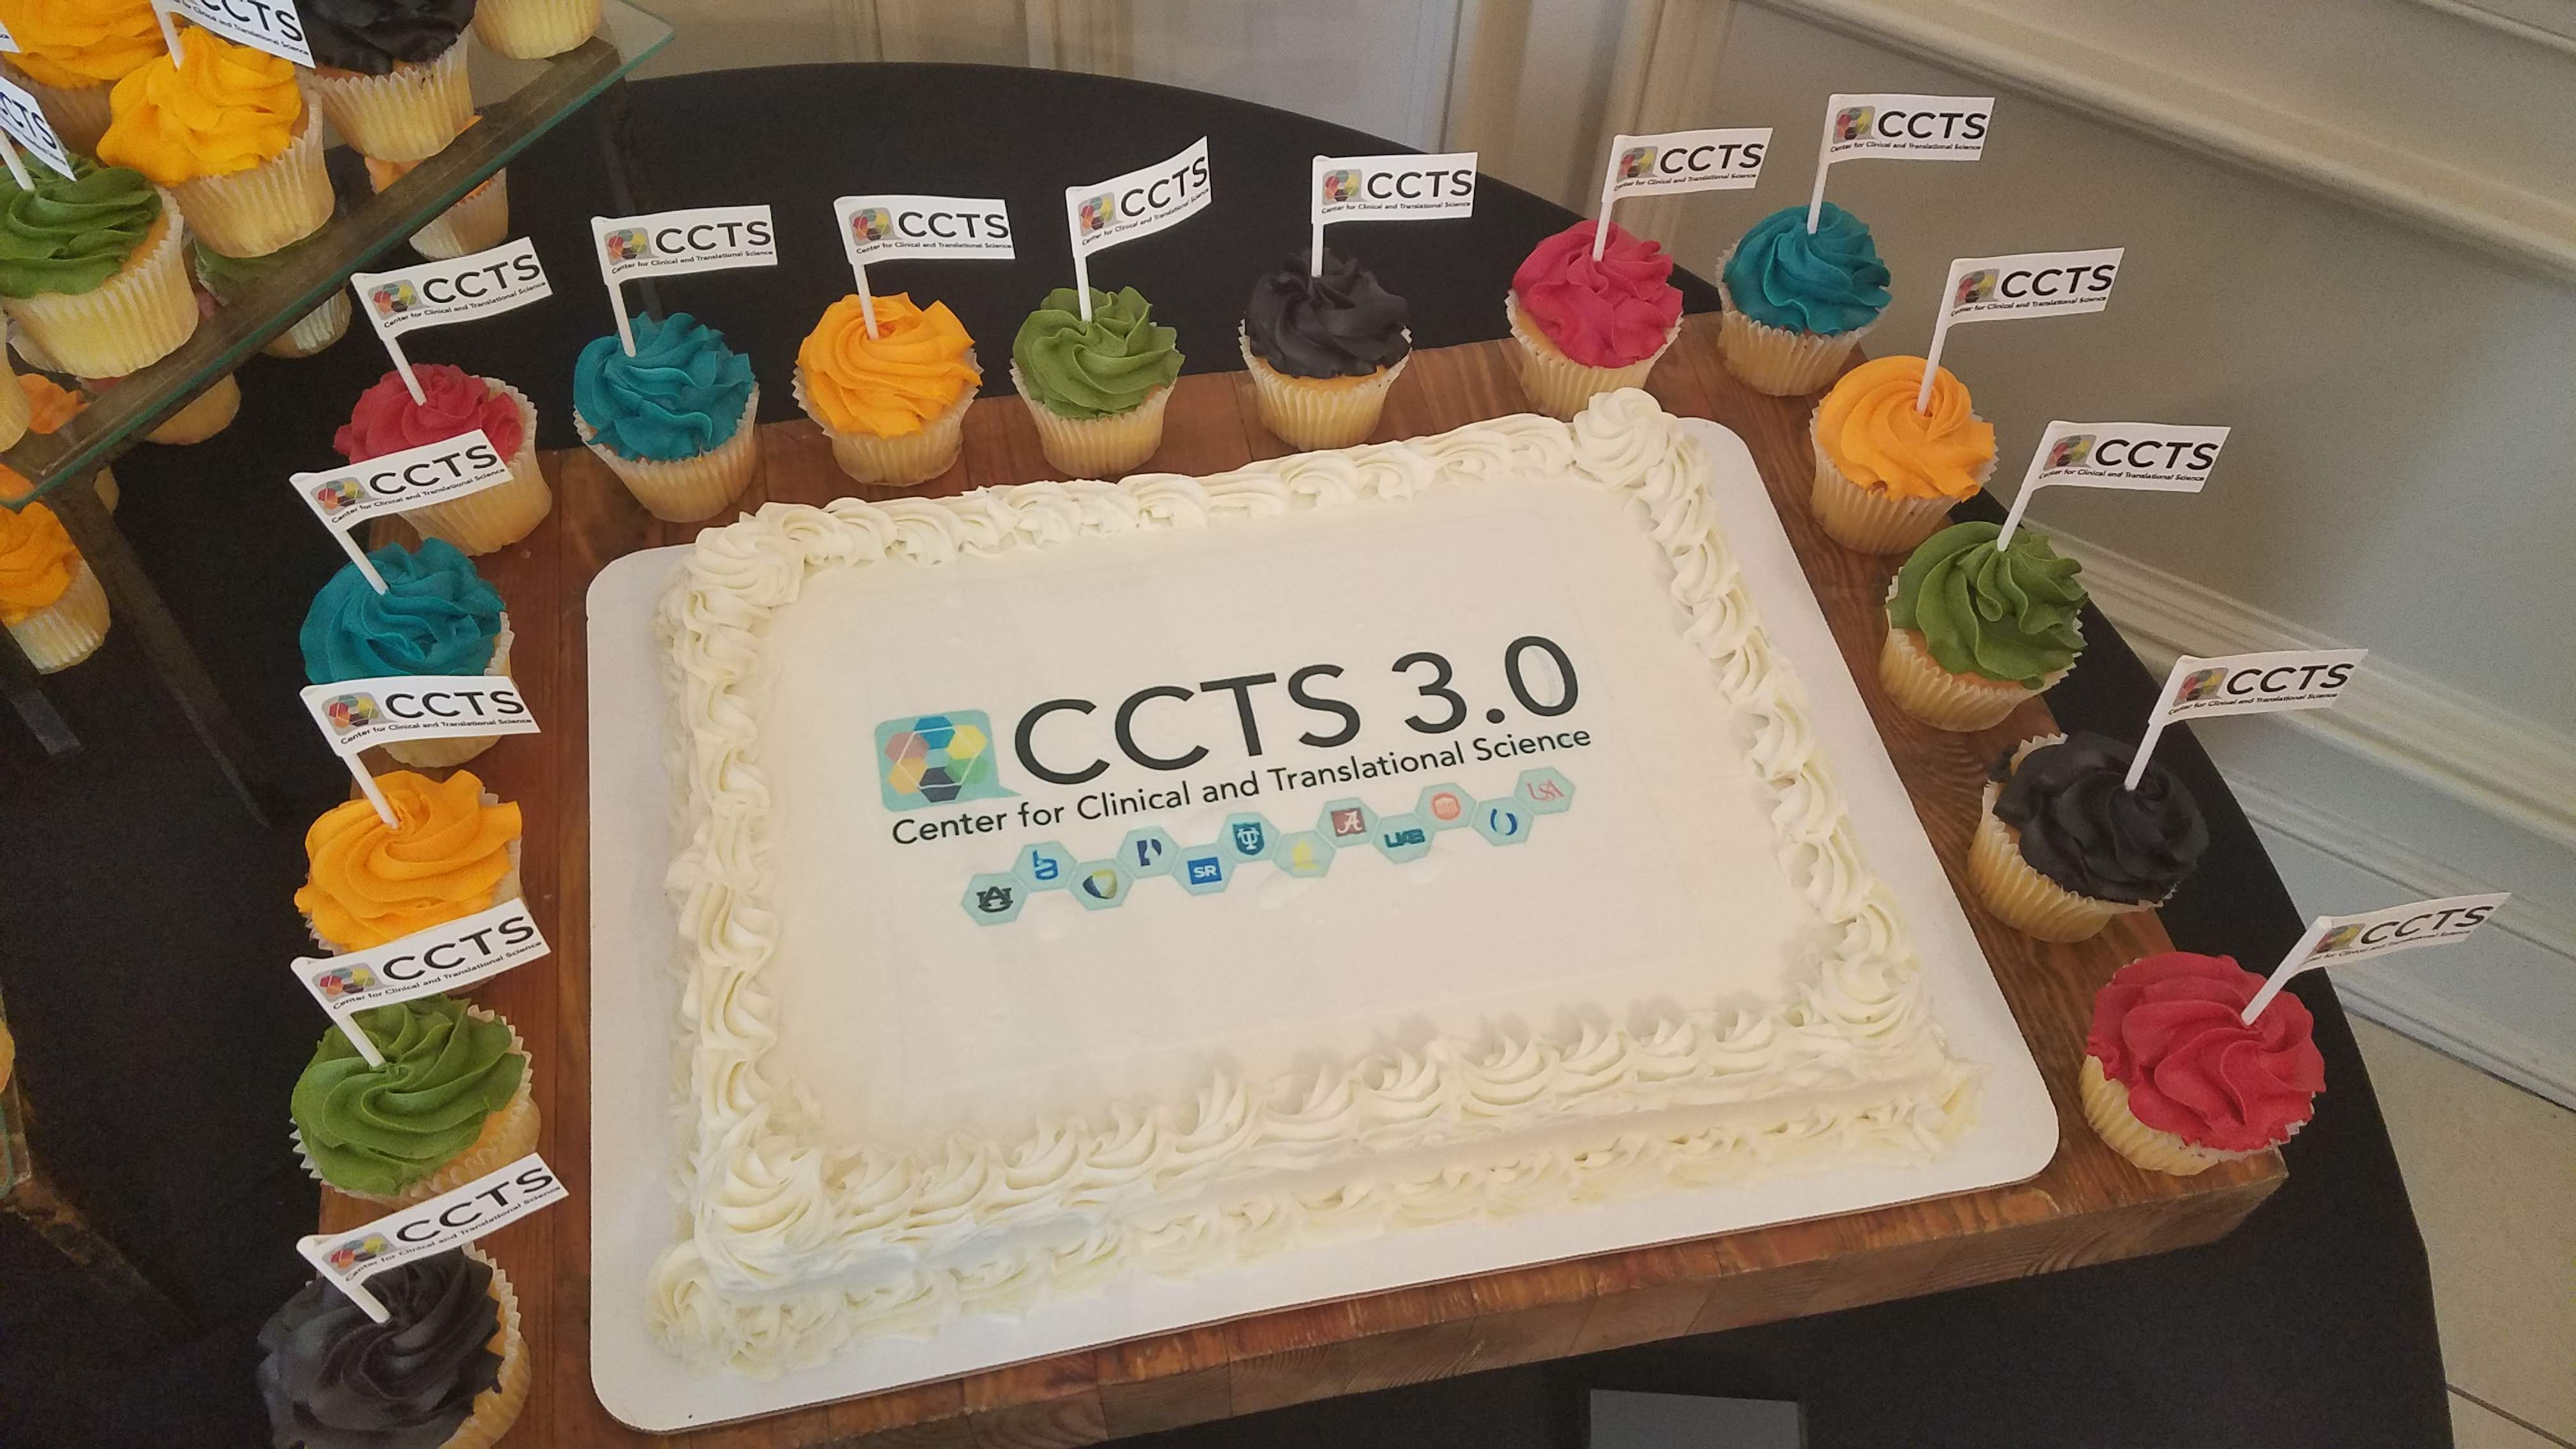 CCTS Celebrates Grant Renewal During Annual Open House